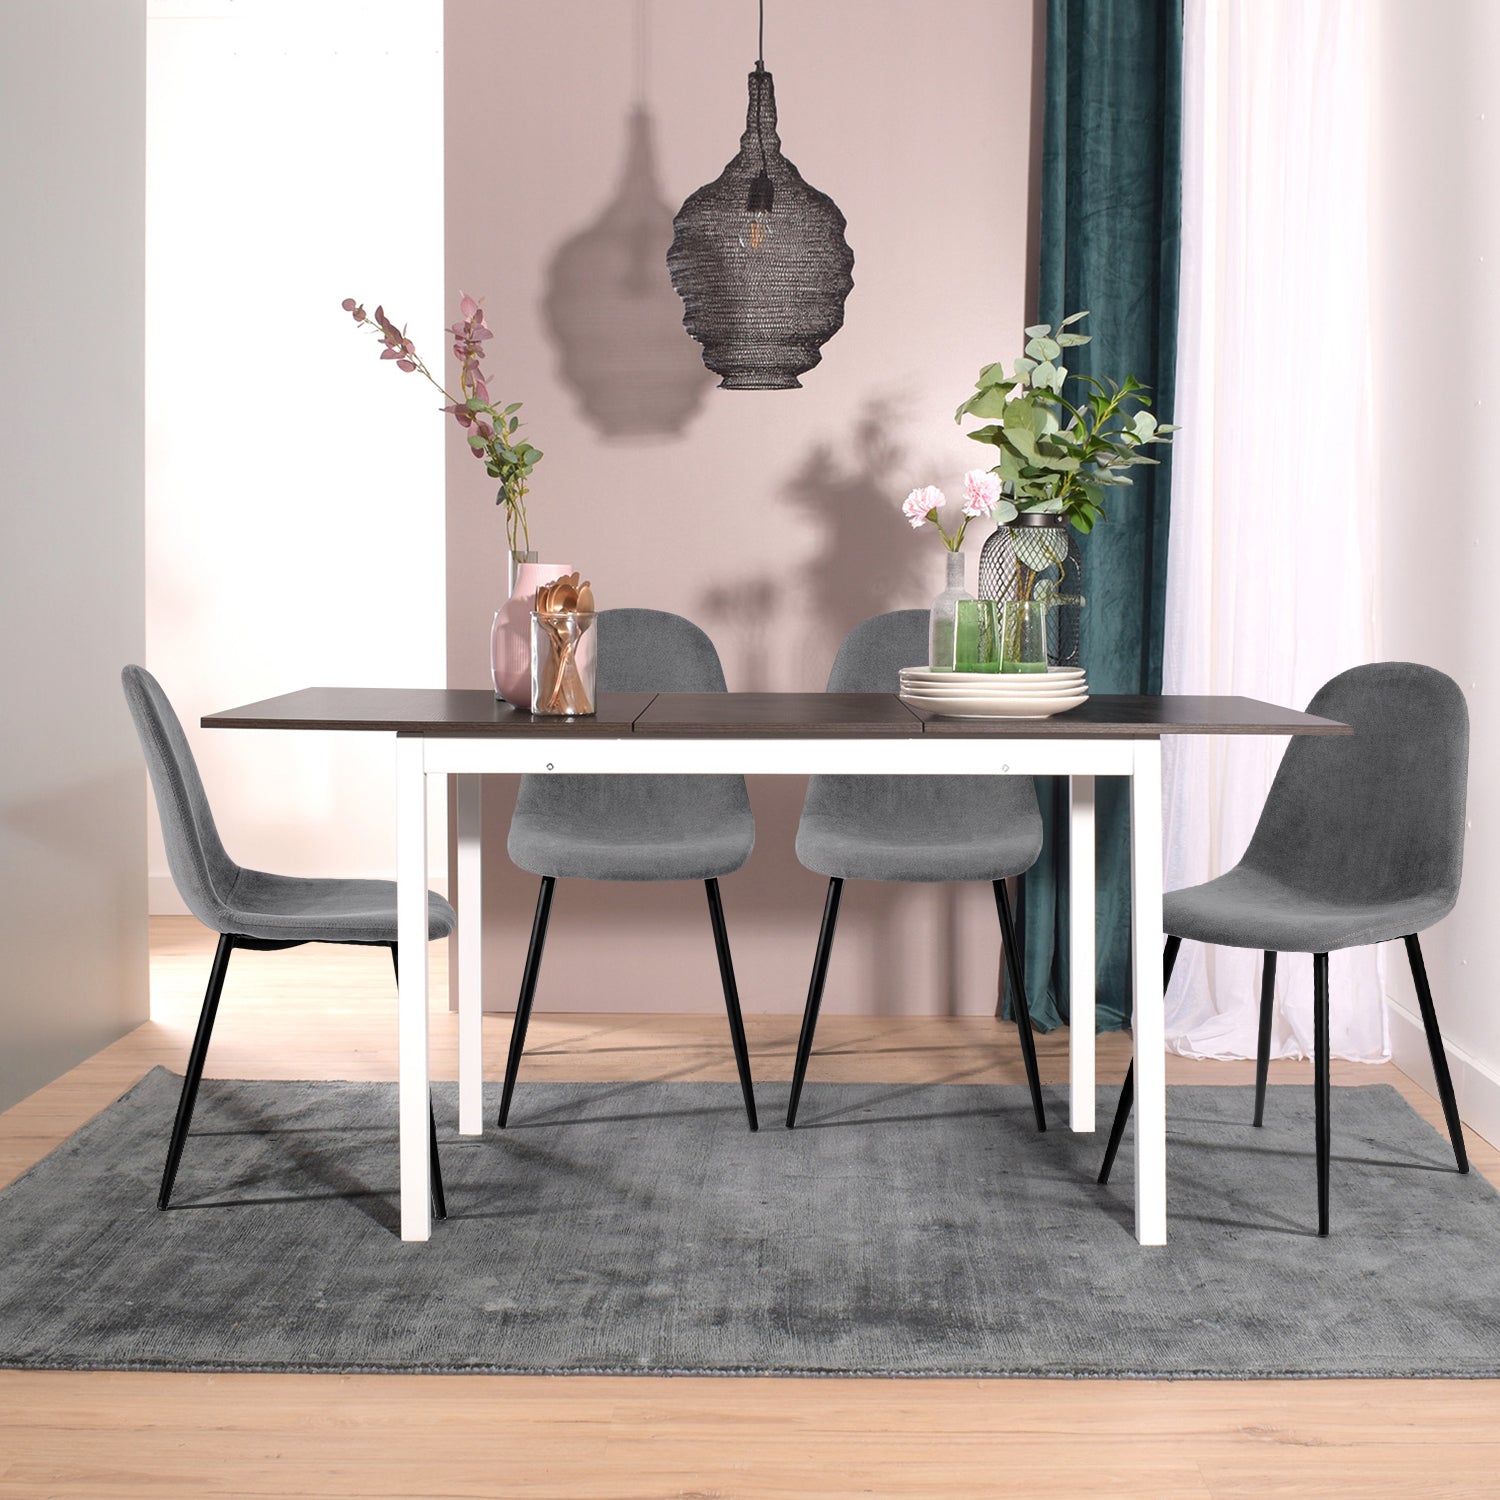 Extendable dining table in metal and wood for 4 to 6 people - BARI LMKZ